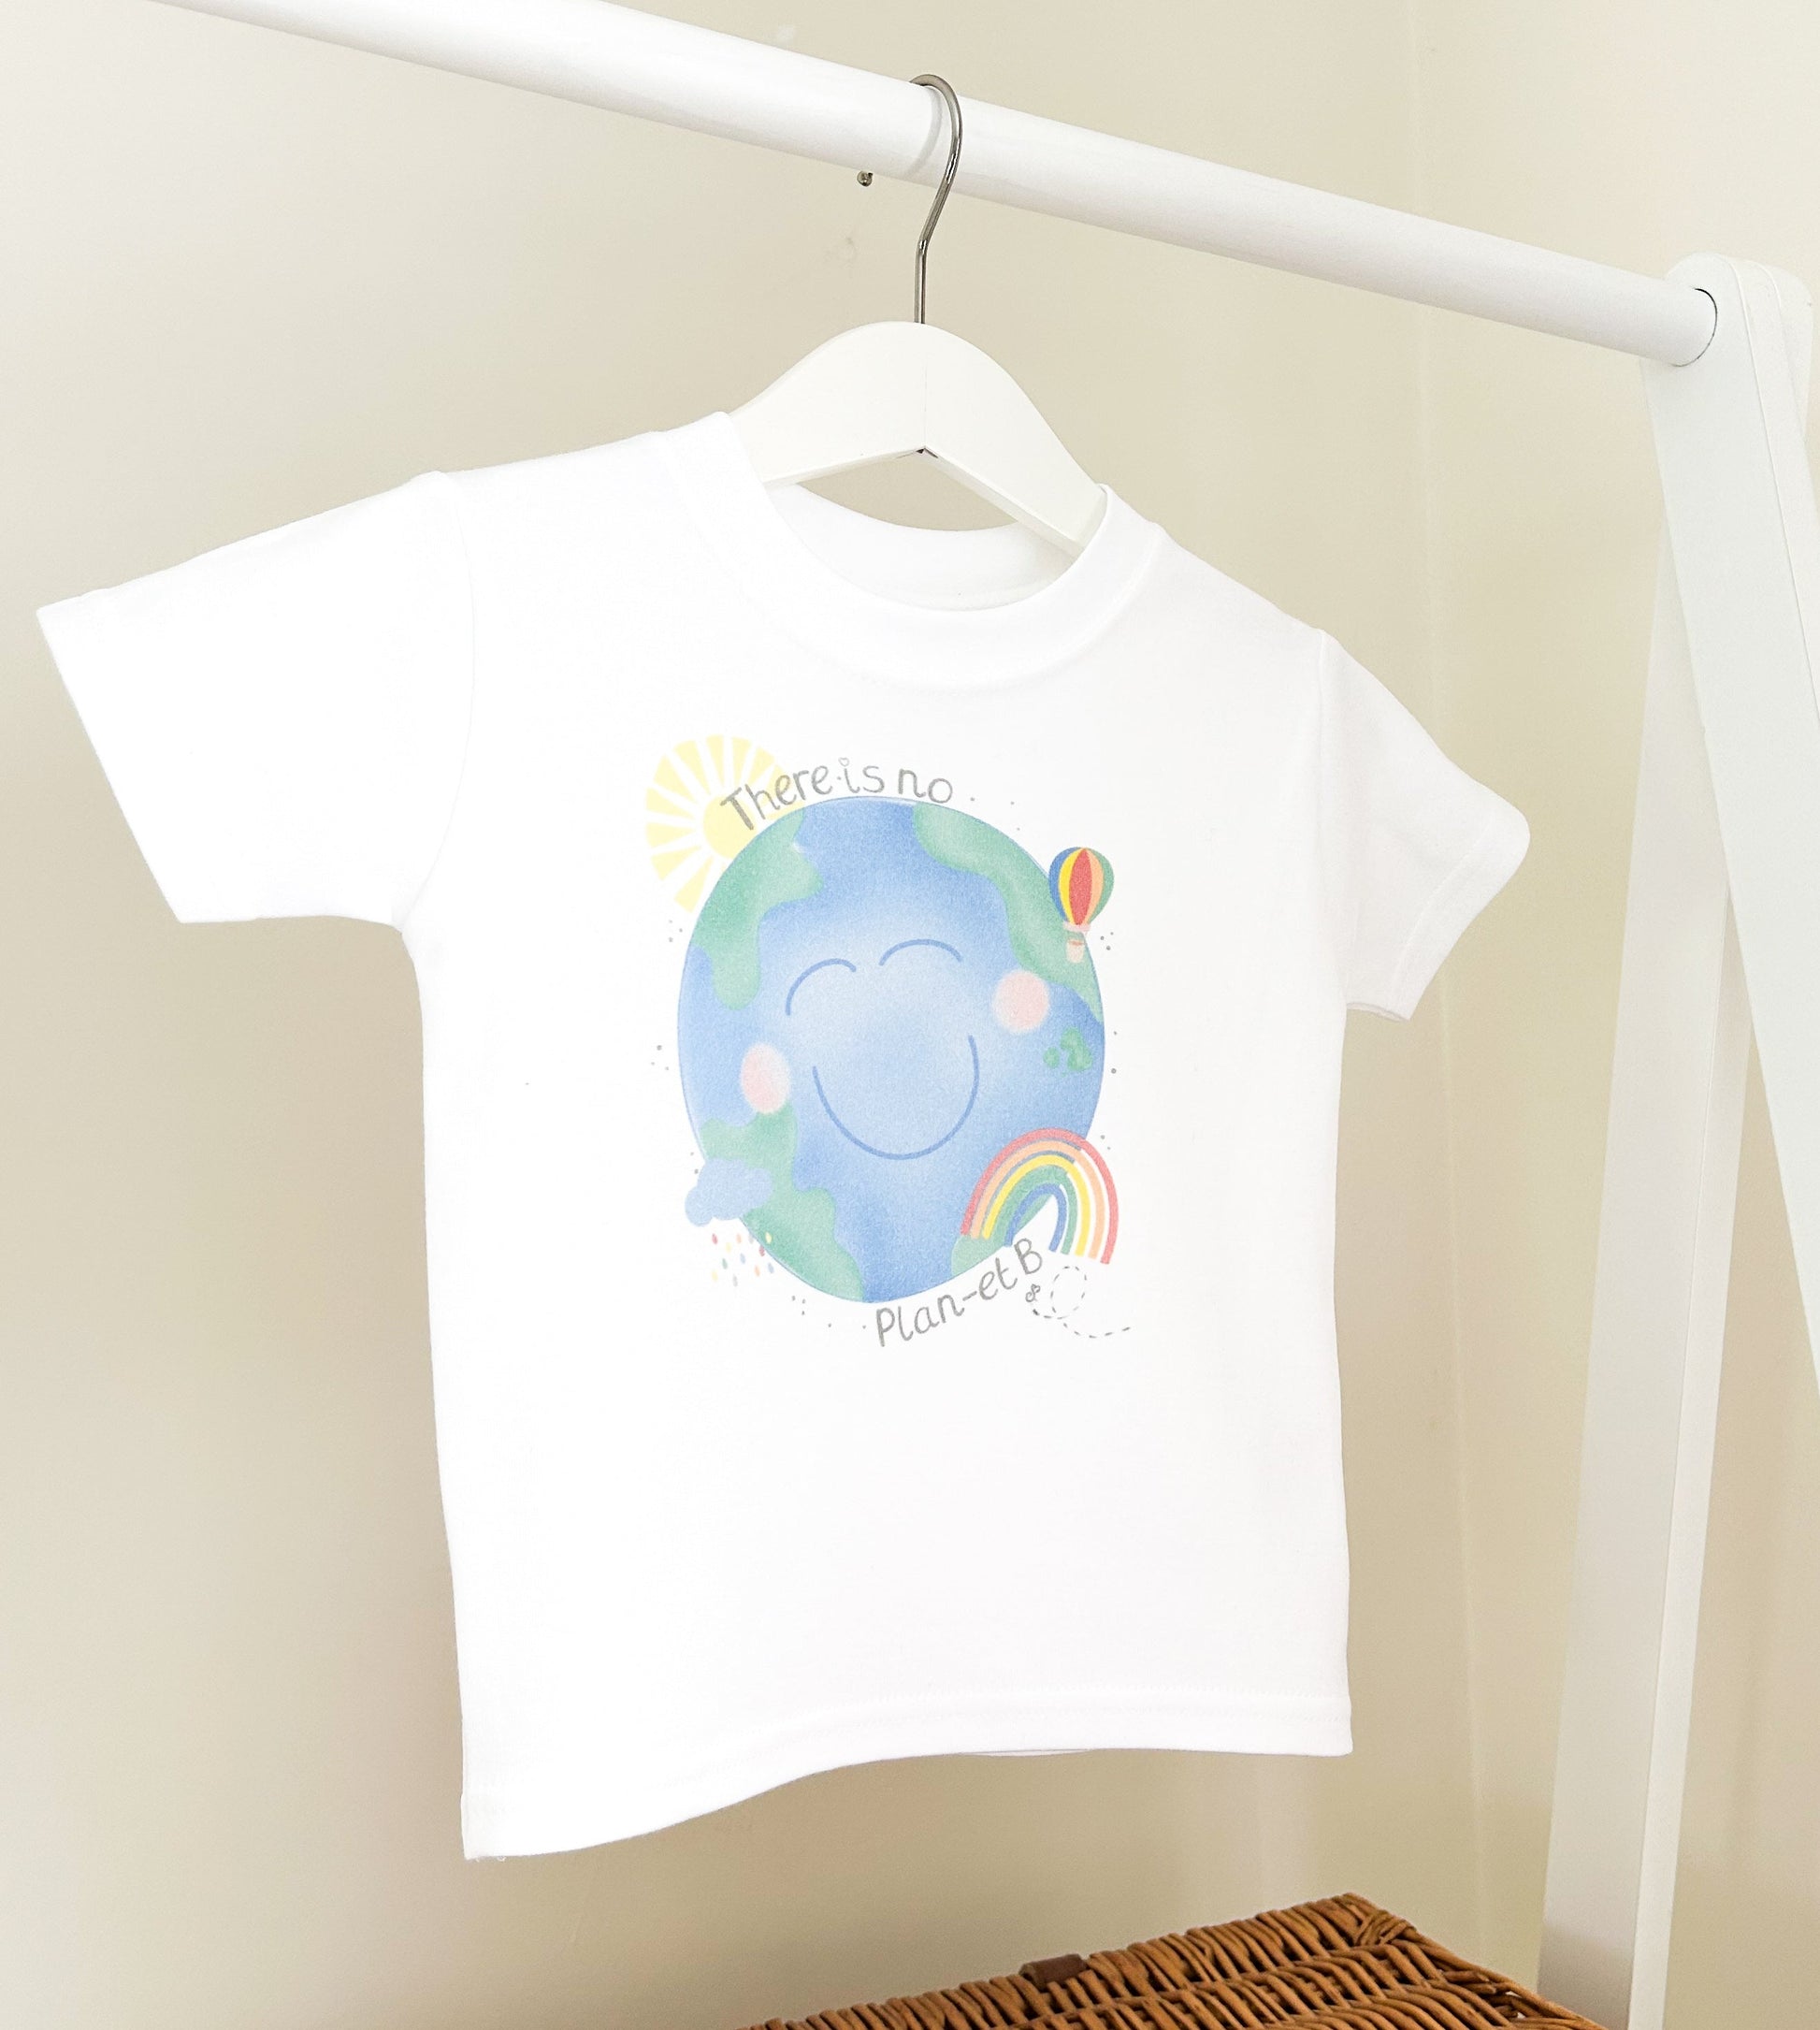 children's clothes rail with a planet earth design t-shirt